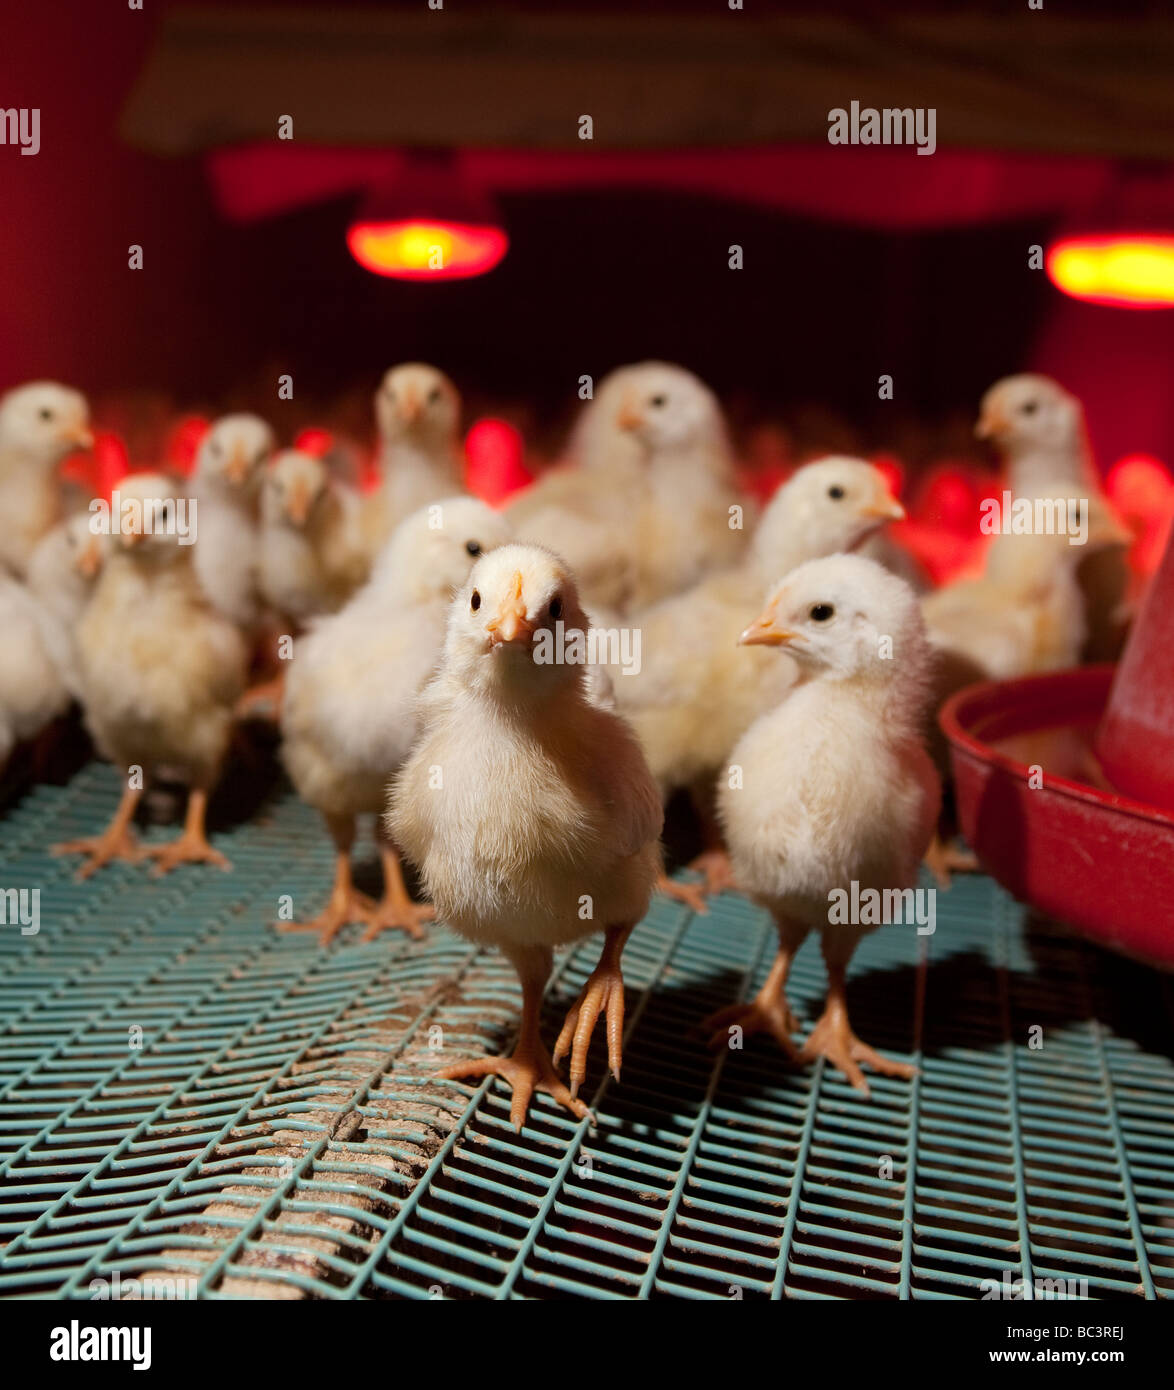 Young chicks under heat lamp, Eastern Iceland Stock Photo